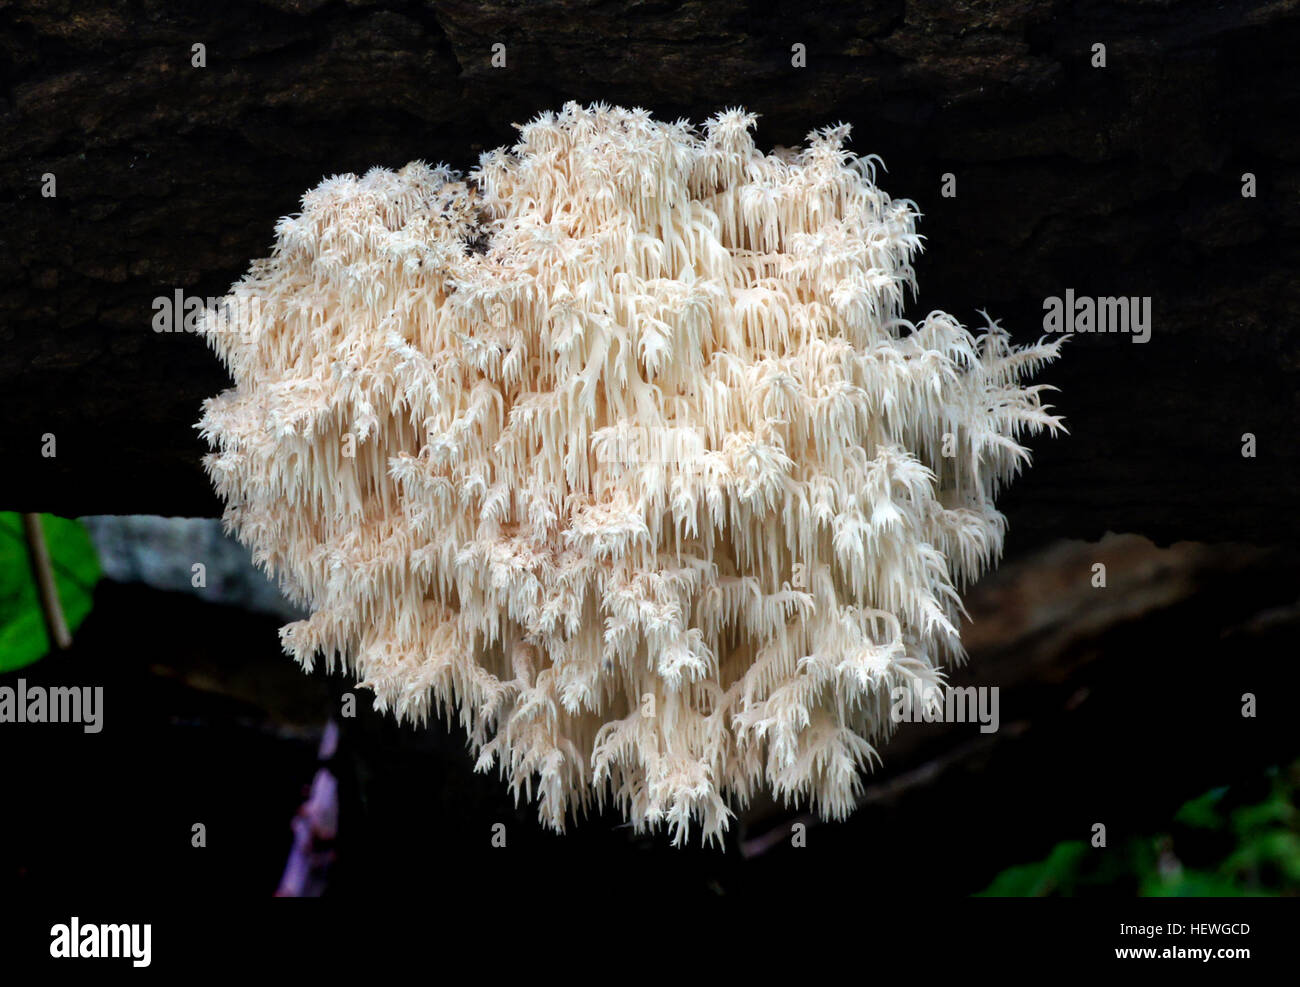 Hericium coralloides can be found as a solitary clump or in clustered clumps on dead hardwood logs and stumps, sometimes in huge patches that can be seen from quite some distance.  It is recognized by its short (mostly about 1 cm long) spines, and the fact that the spines hang in rows along delicate branches. It is saprobic and possibly parasitic; growing alone or gregariously at summer and autumn.  The fruiting body can be  8-30 cm  in diameter, fleshy, white at first, light brown or yellowish with age, a few main branches arising from the narrow base, every main branch sending forth numerous Stock Photo